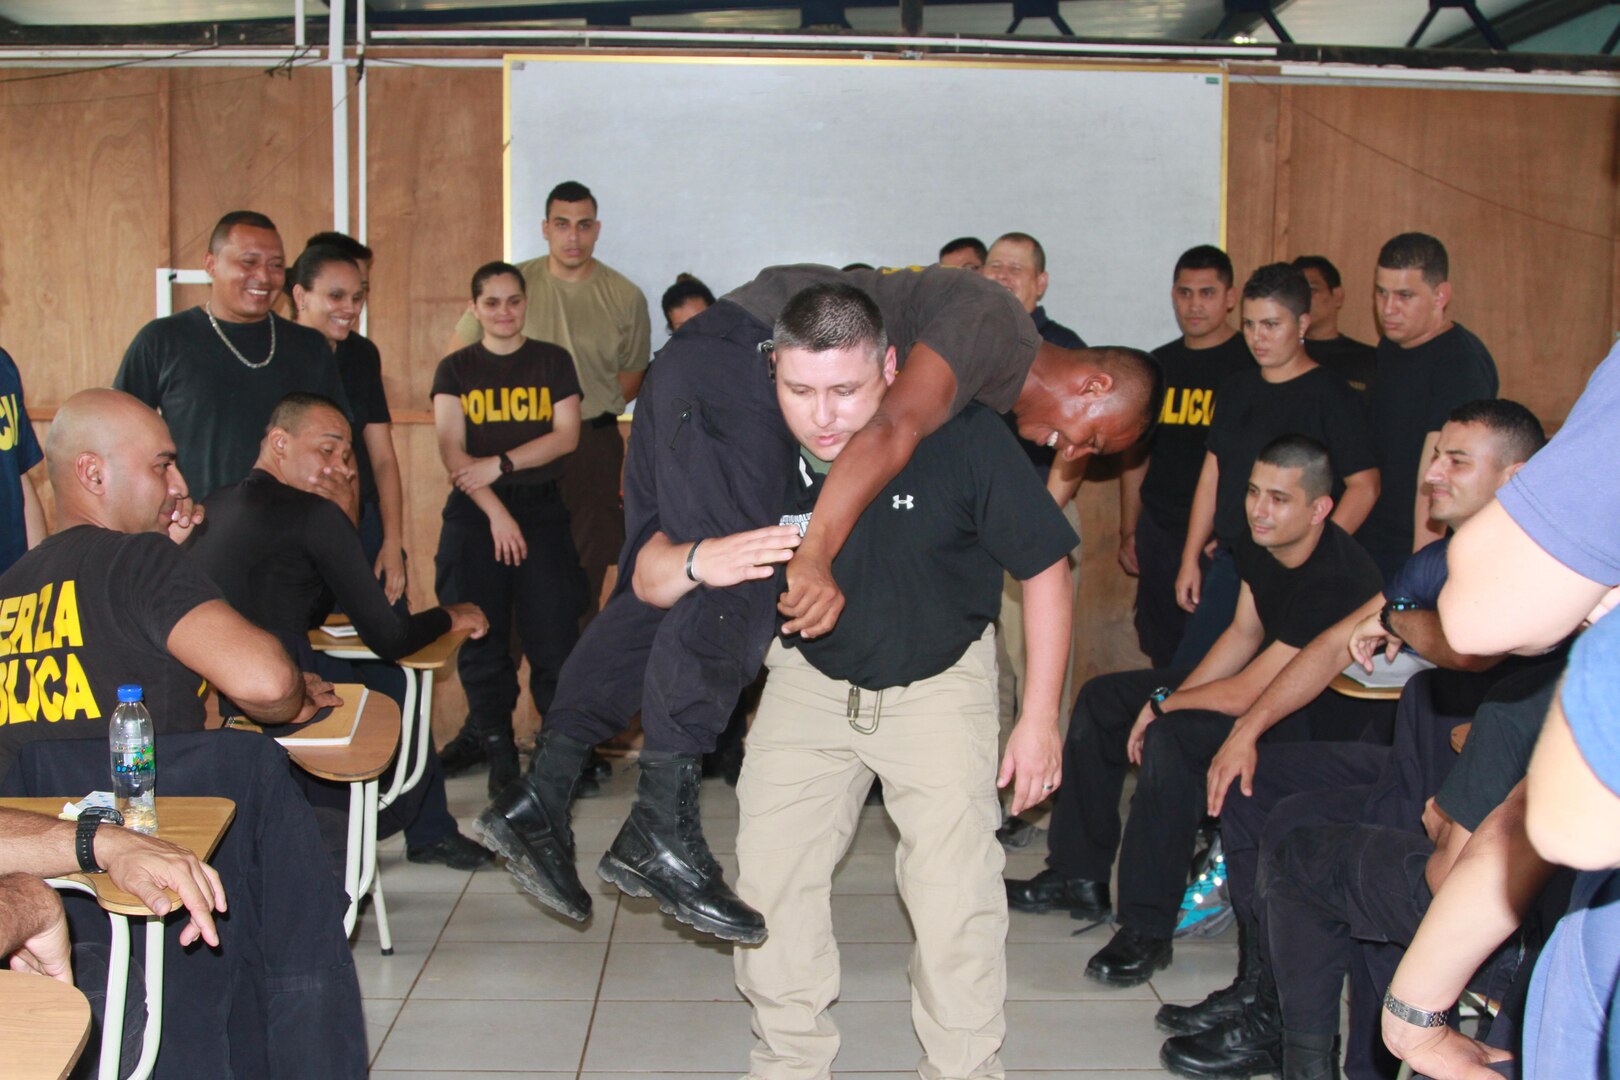 Sgt. 1st Class David Muniz, center, demonstrates a first aid buddy carry to 34 Costa Rican first responders from three agencies. Police officers, border patrol officers and Coast Guardsmen attended an exchange of information which included some classroom instruction with the majority of time spent conducting hands-on practical exercises. 